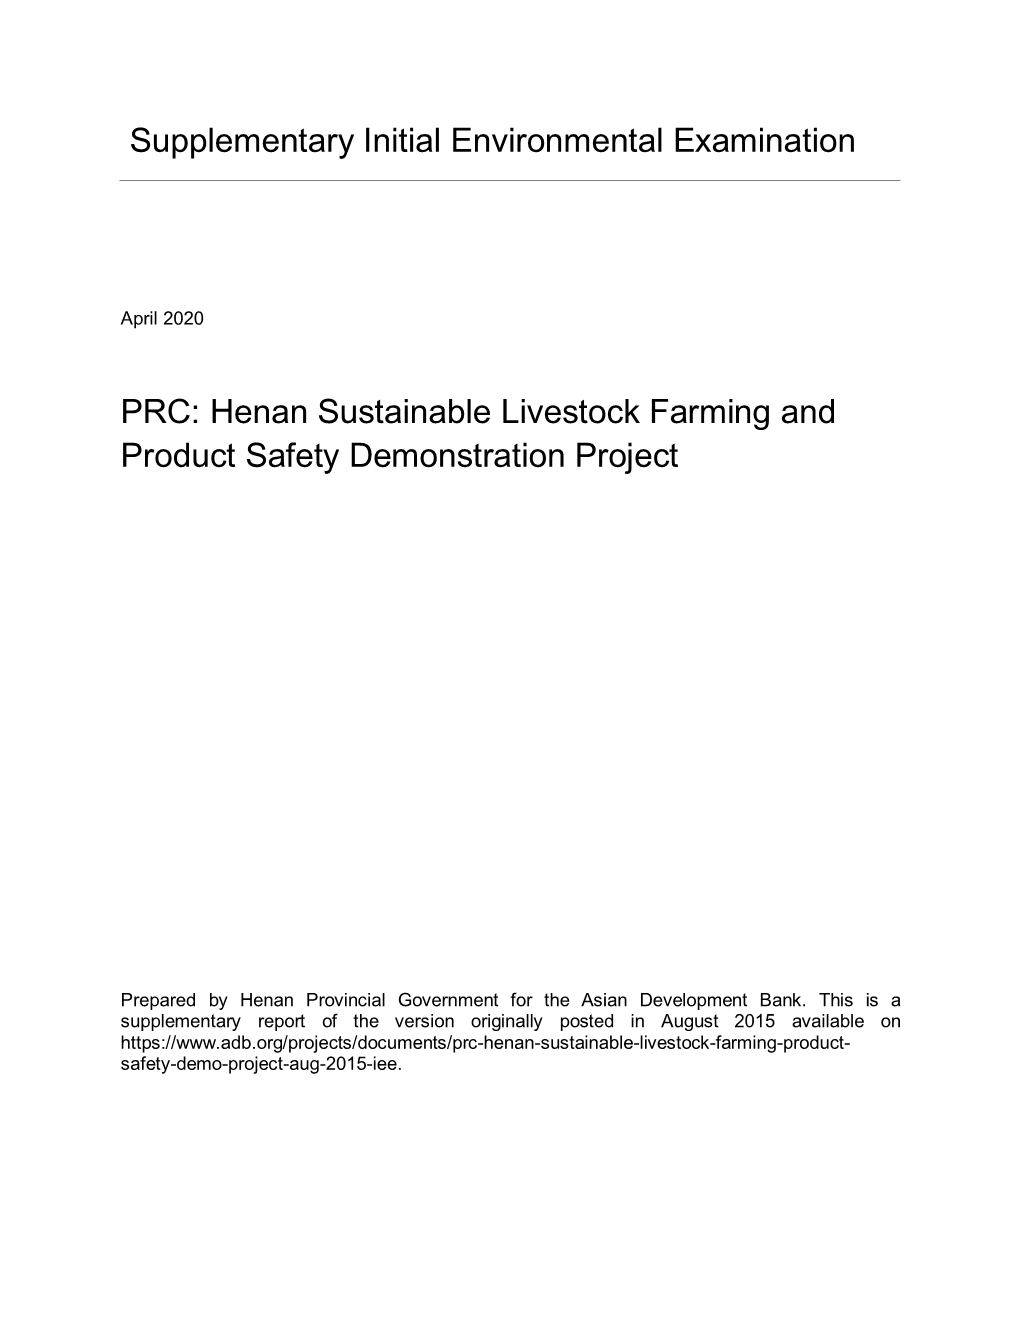 Henan Sustainable Livestock Farming and Product Safety Demonstration Project